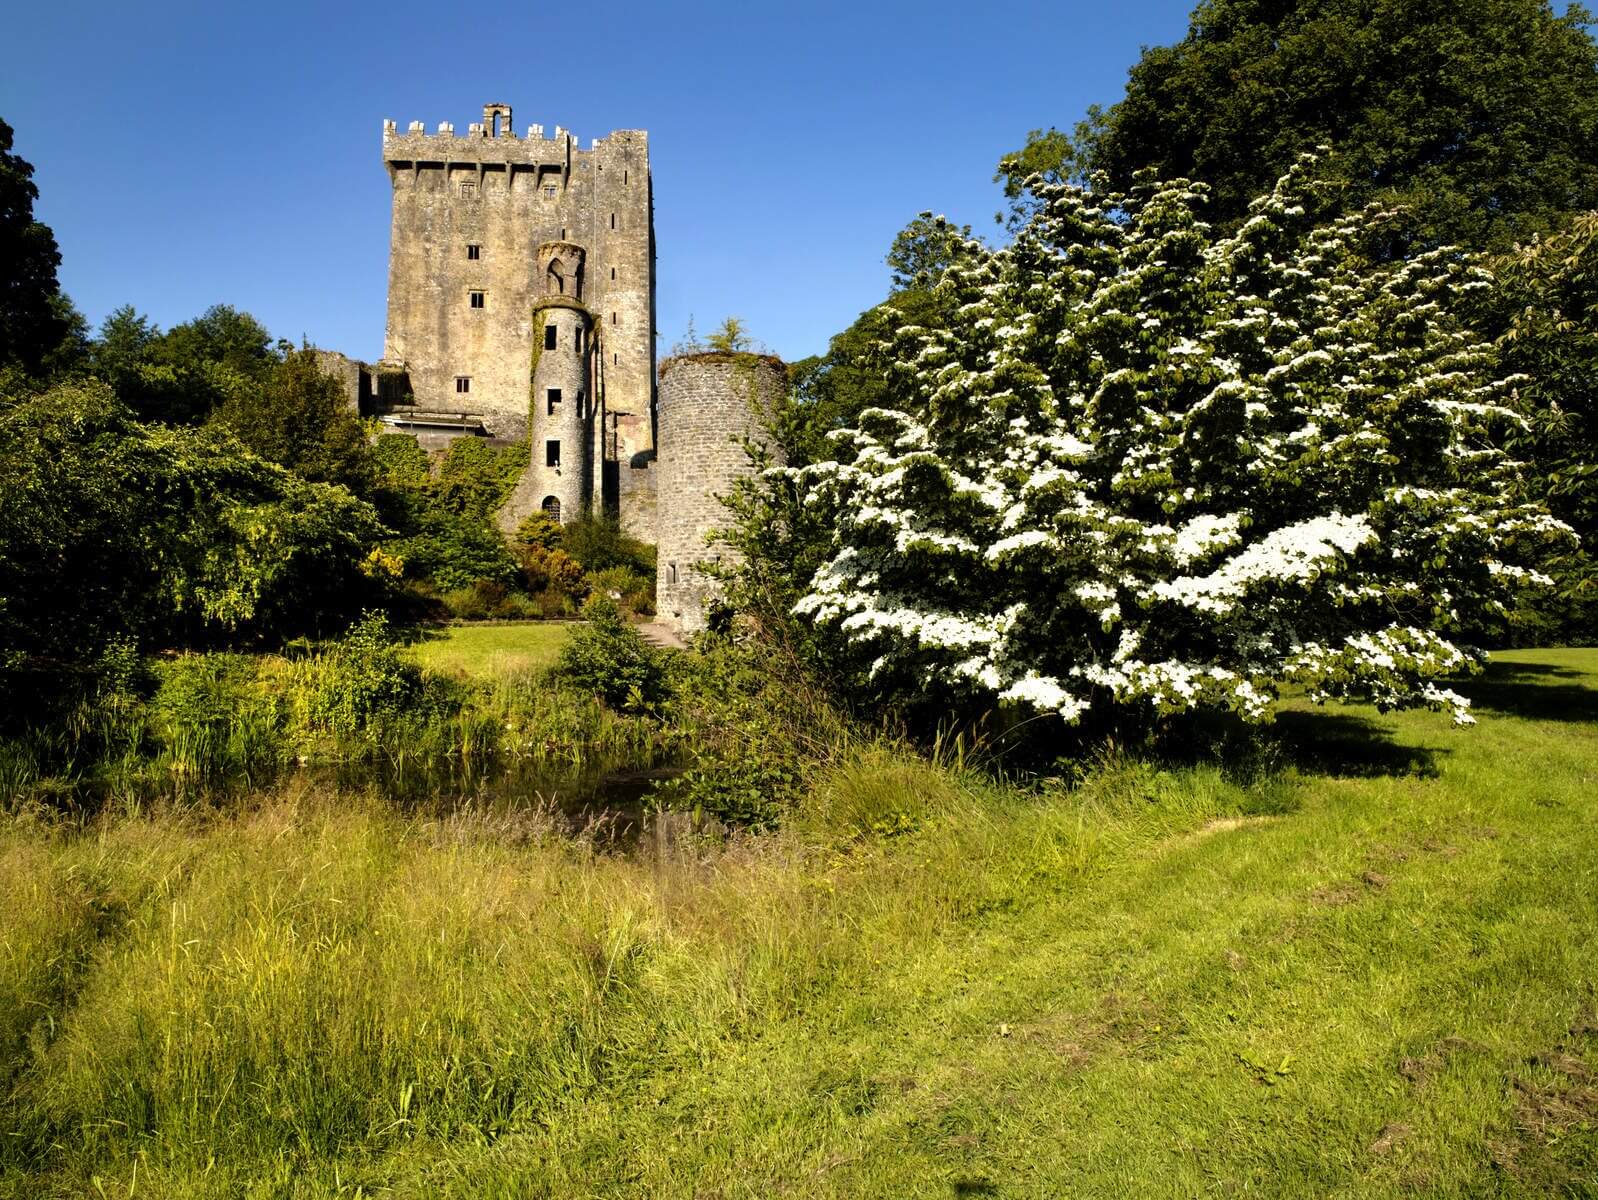 A long shot of the Blarney Castle Towers